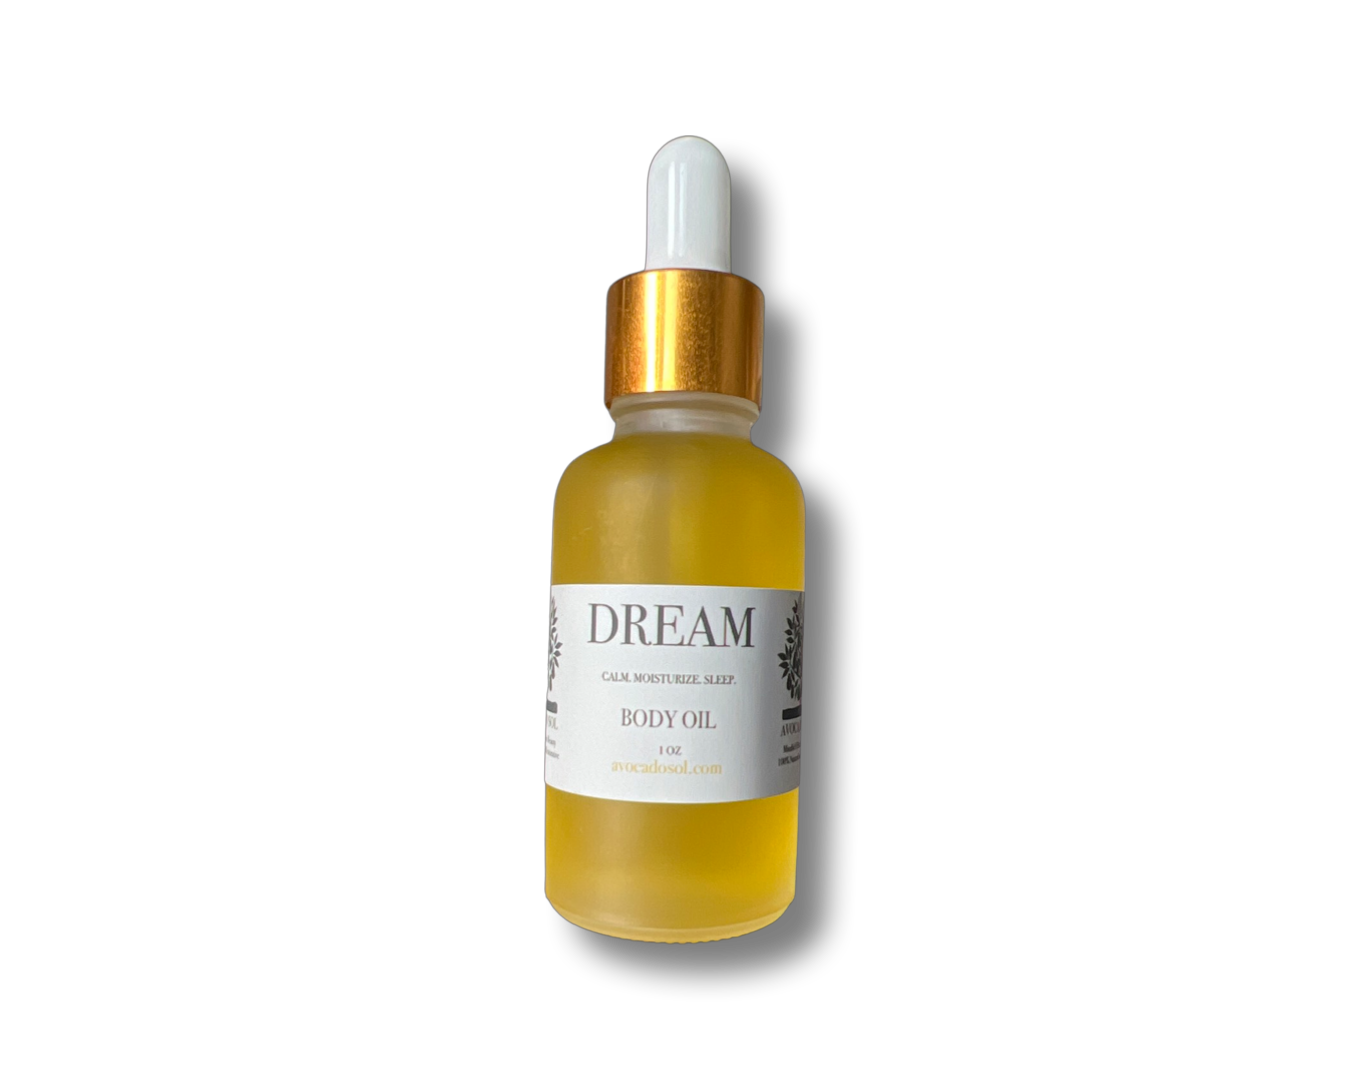 Skin care, facial serum, brightener, facial brightener, facial, serum, skin, face lotion, all natural serum, organic skin care, avocado skincare, avocado sol, avocado, serums, facial care, rejuvenating skin care, rejuvenate, anti aging, youth, less wrinkles, reduce fine lines, fine lines, age spots, wrinkles, tattoo care, cbd, cbd tattoo, tattoos, antiseptic, anti inflammatory, cleanser, facial wash, face wash, natural face wash, dream oil, body oil, sleep oil, organic sleep, essential oils